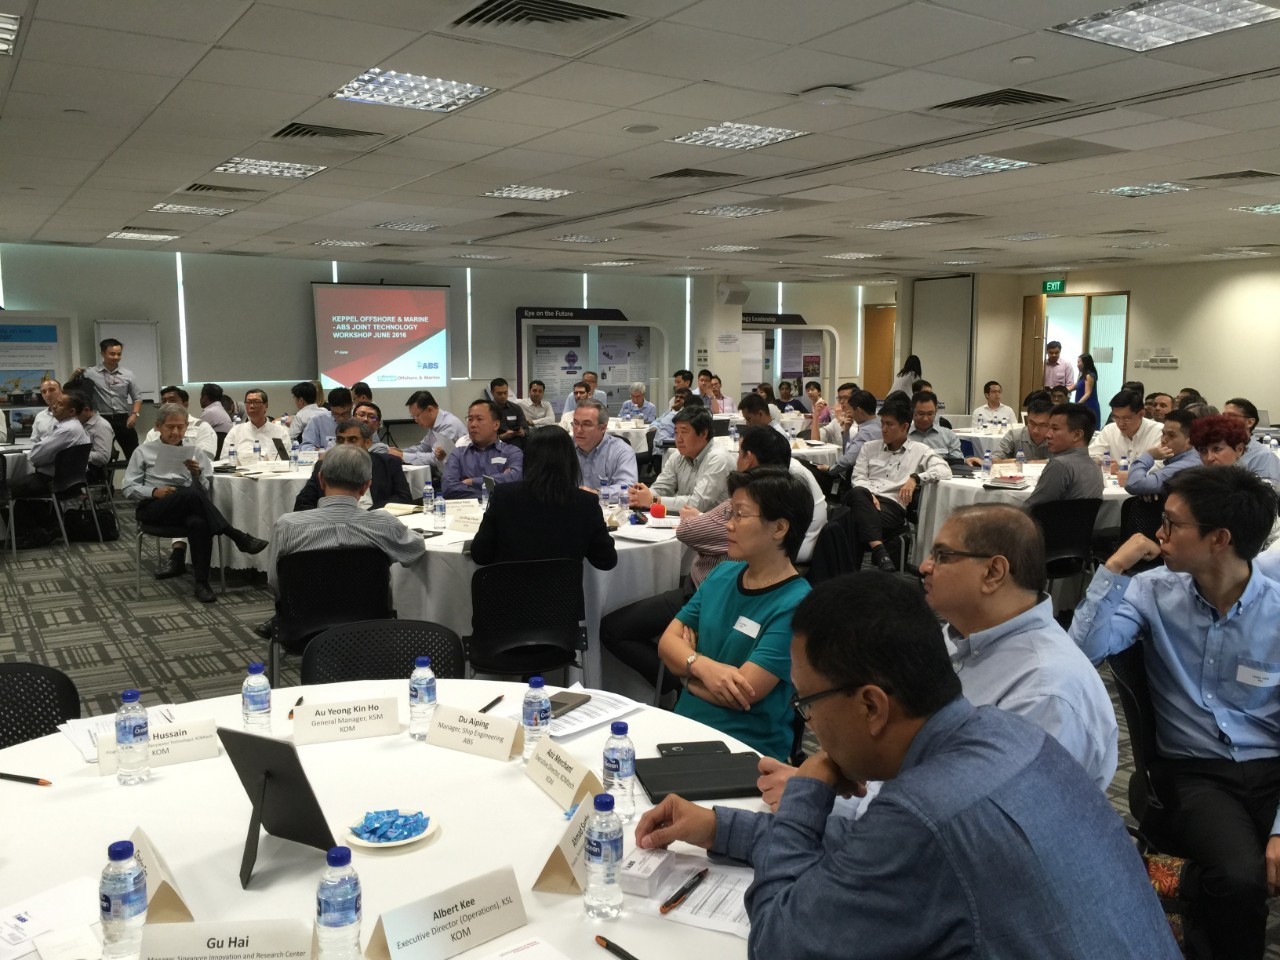 Senior managers and technical personnel from ABS and Keppel participating in a two-day workshop.